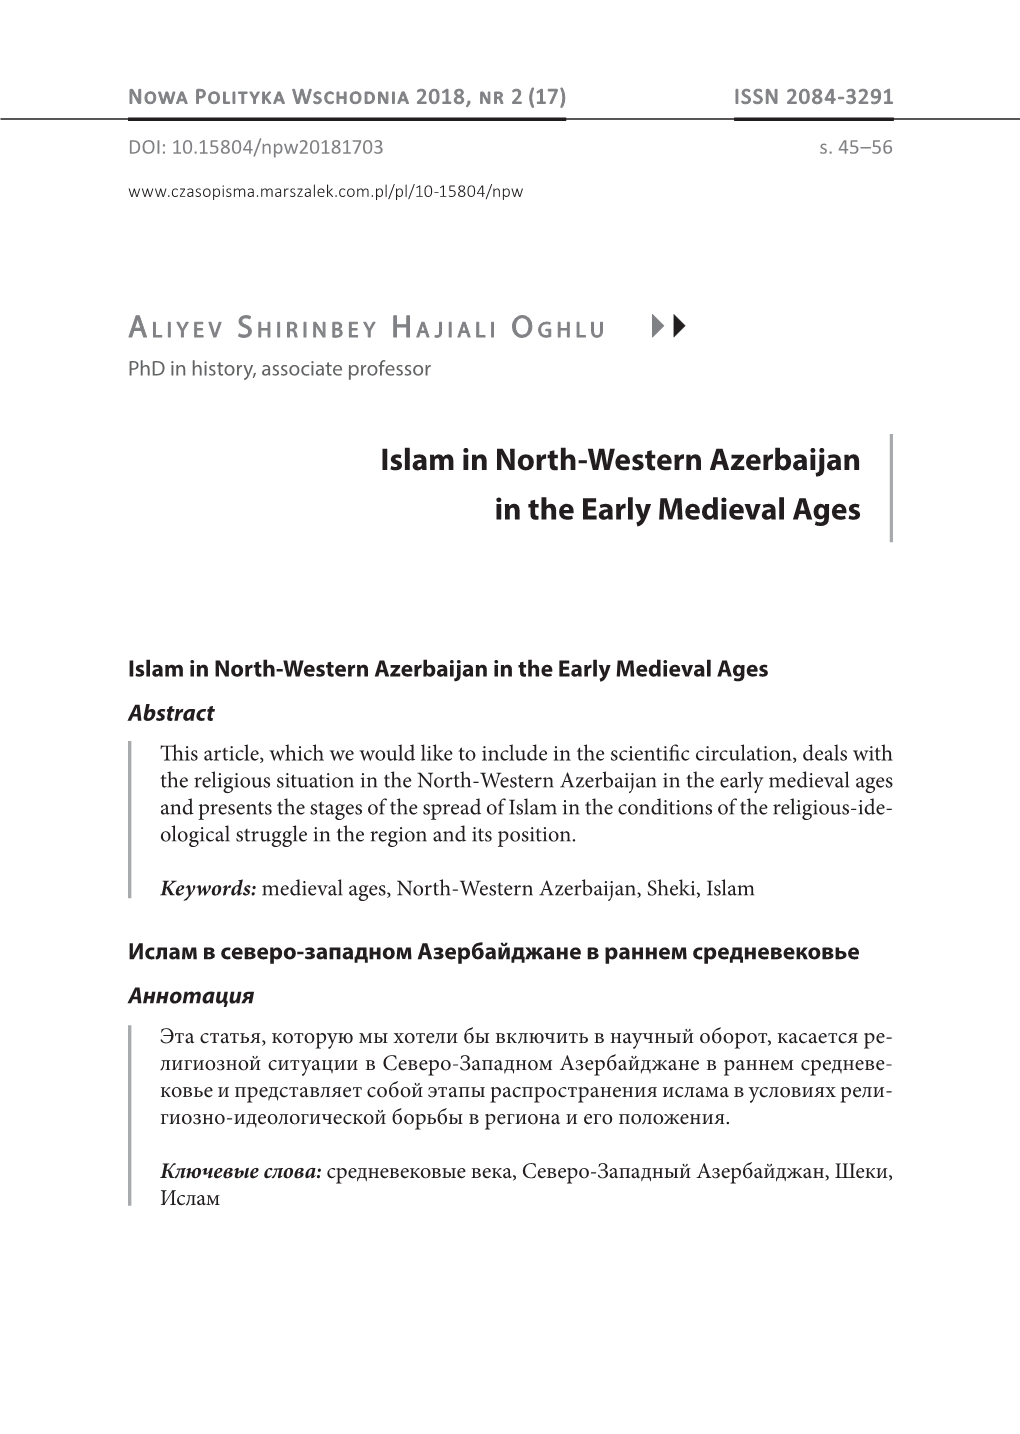 Islam in North-Western Azerbaijan in the Early Medieval Ages